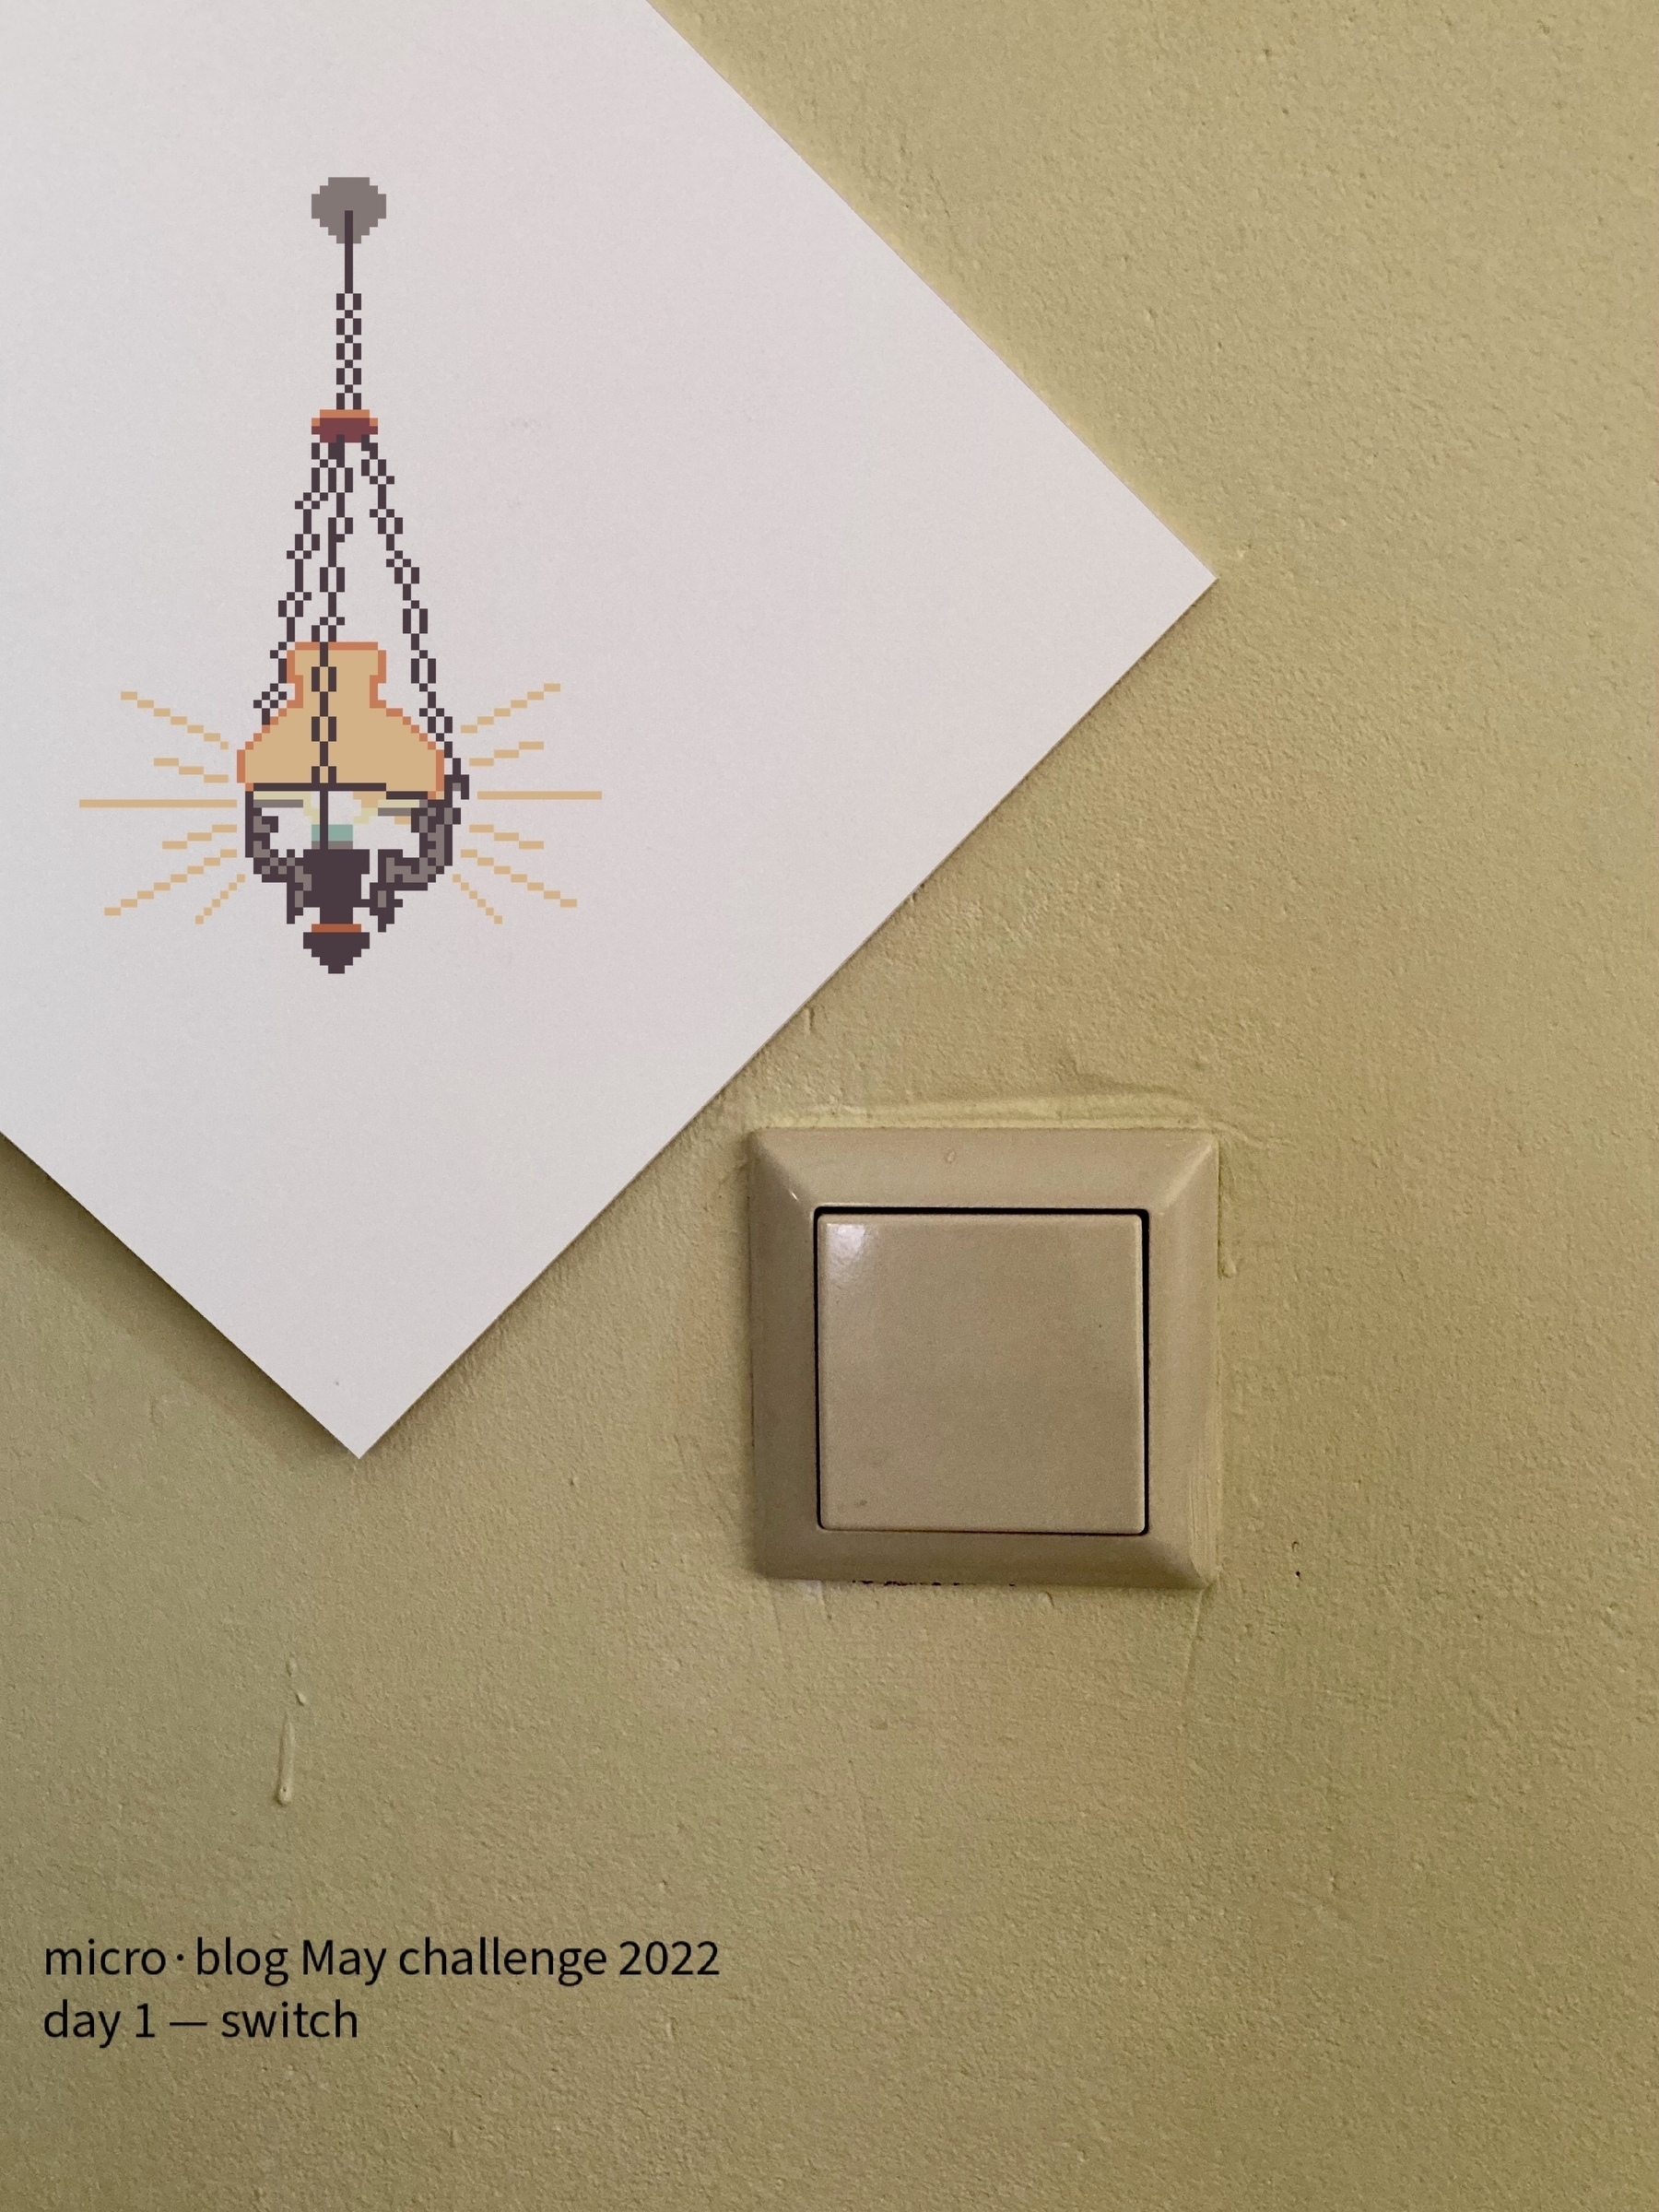 light switch with pixel art lamp